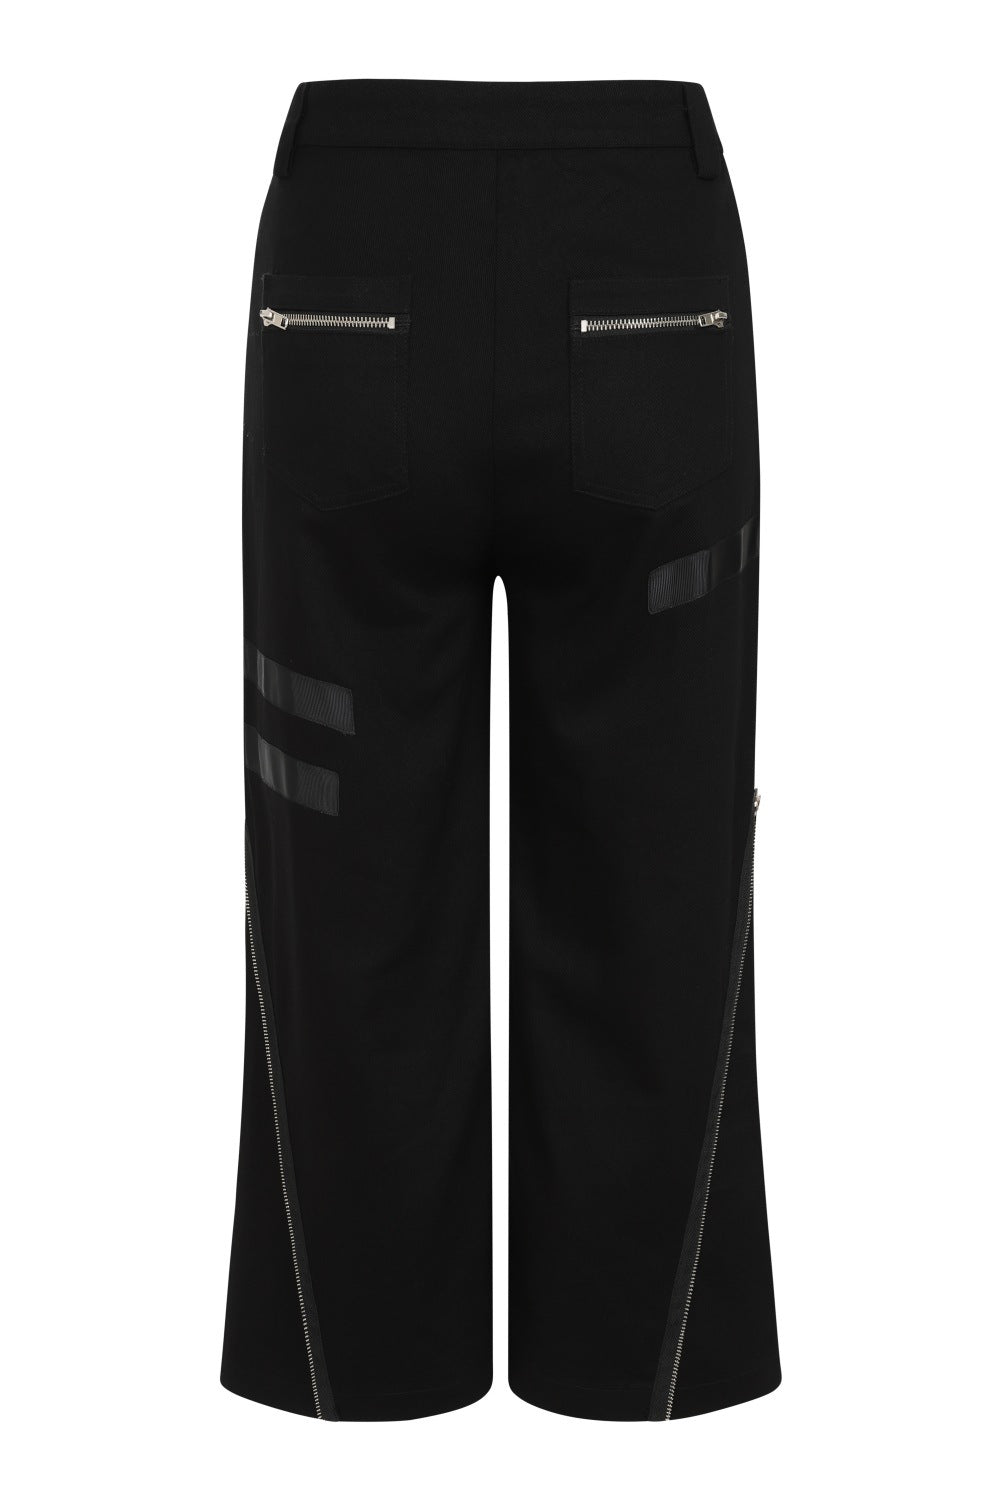 Baggy black trousers with zip and buckle features